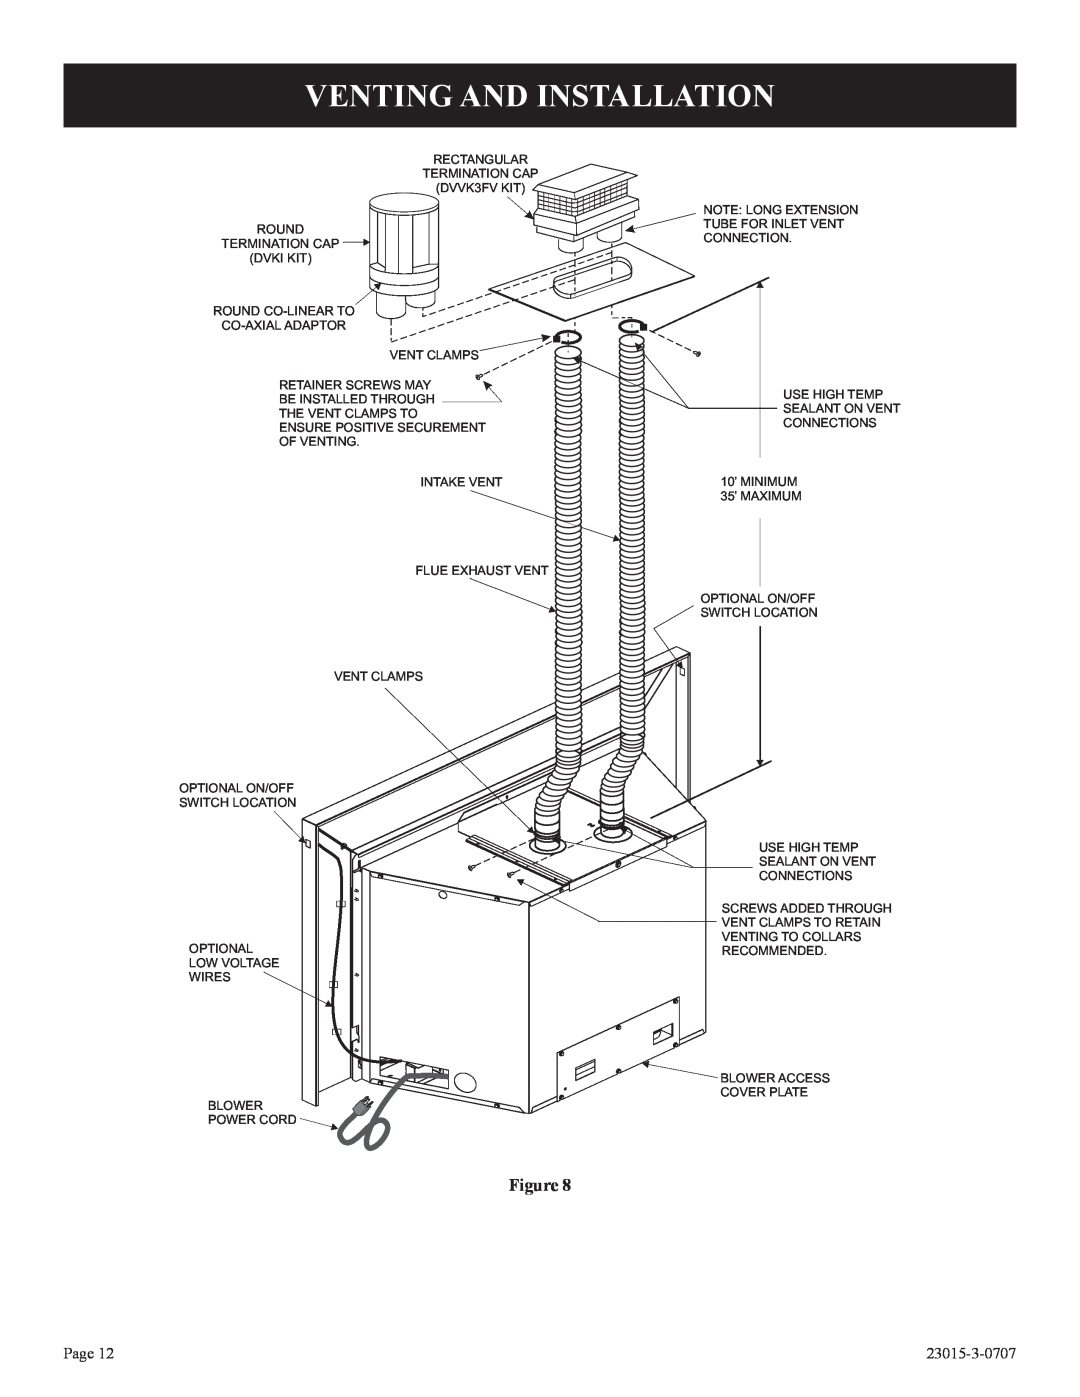 Empire Comfort Systems DV25IN33L Venting And Installation, Page, 23015-3-0707, RECTANGULAR TERMINATION CAP DVVK3FV KIT 